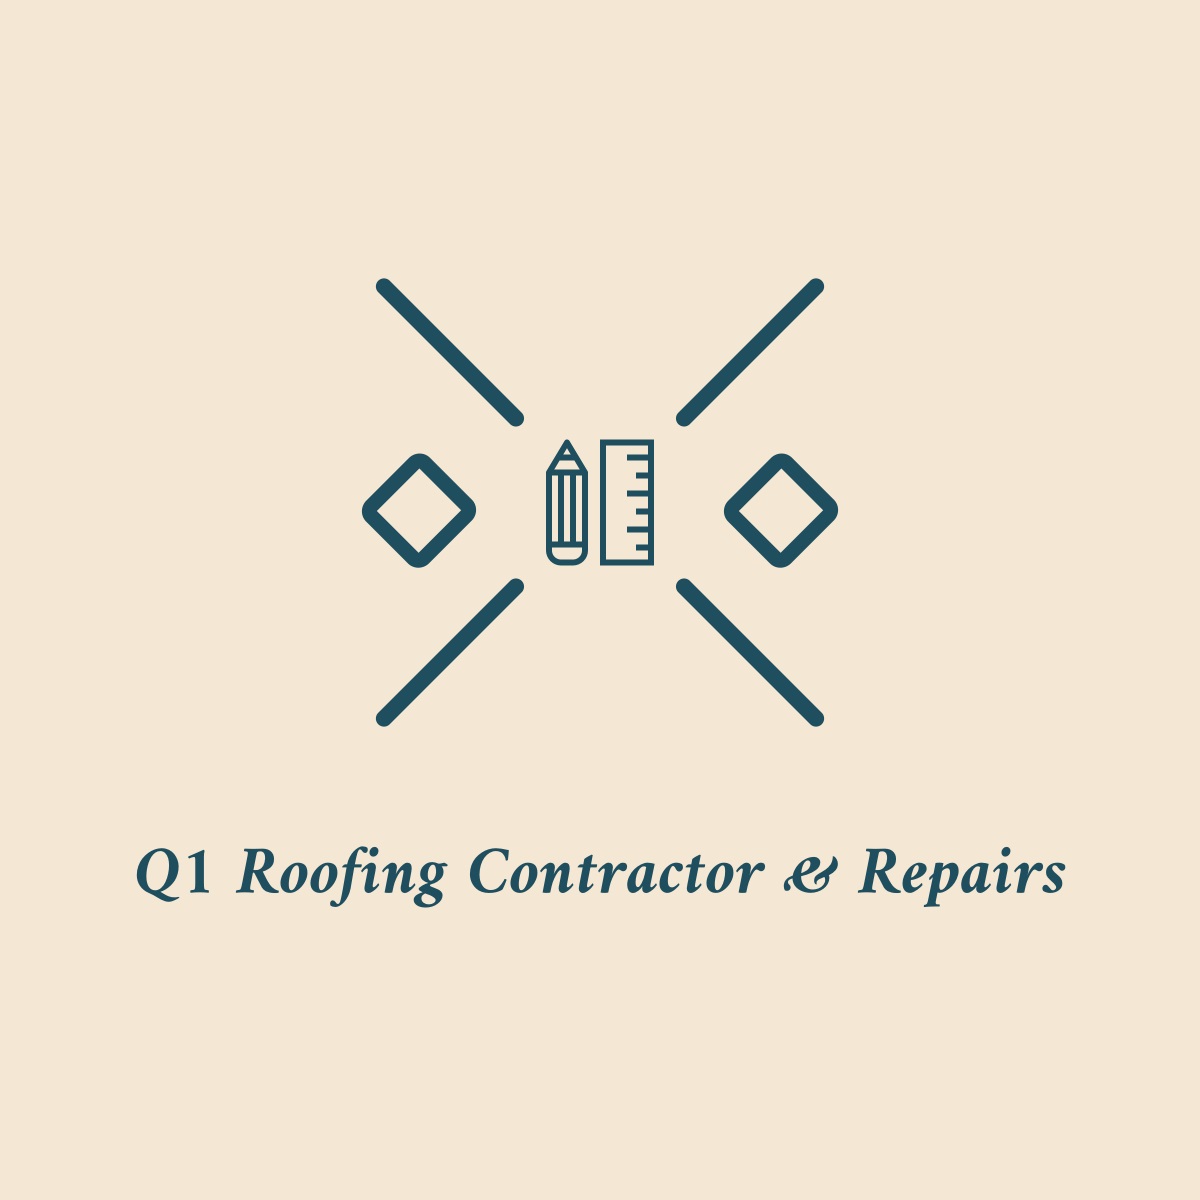 Q1 Roofing Contractor & Repairs's Logo